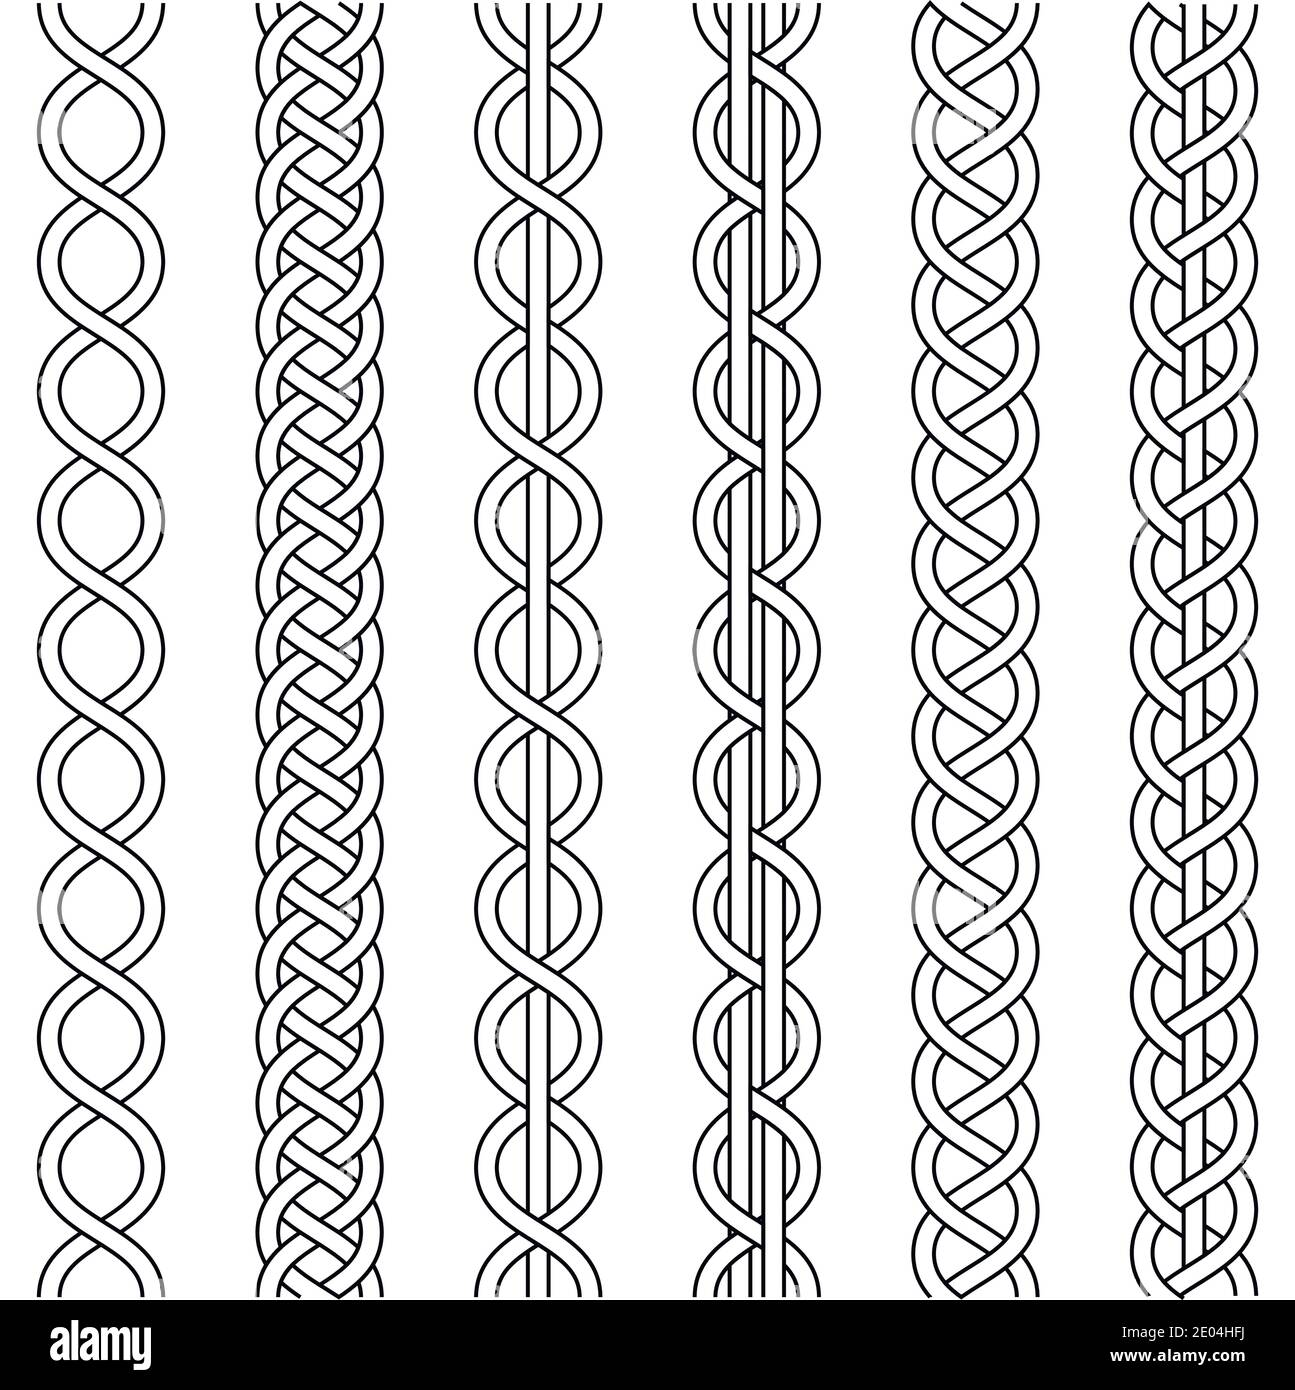 Rope cable weaving, knot twisted braid, macrame crochet weaving, braid knot, vector knitted braided pattern intersecting strands wicker, set Stock Vector